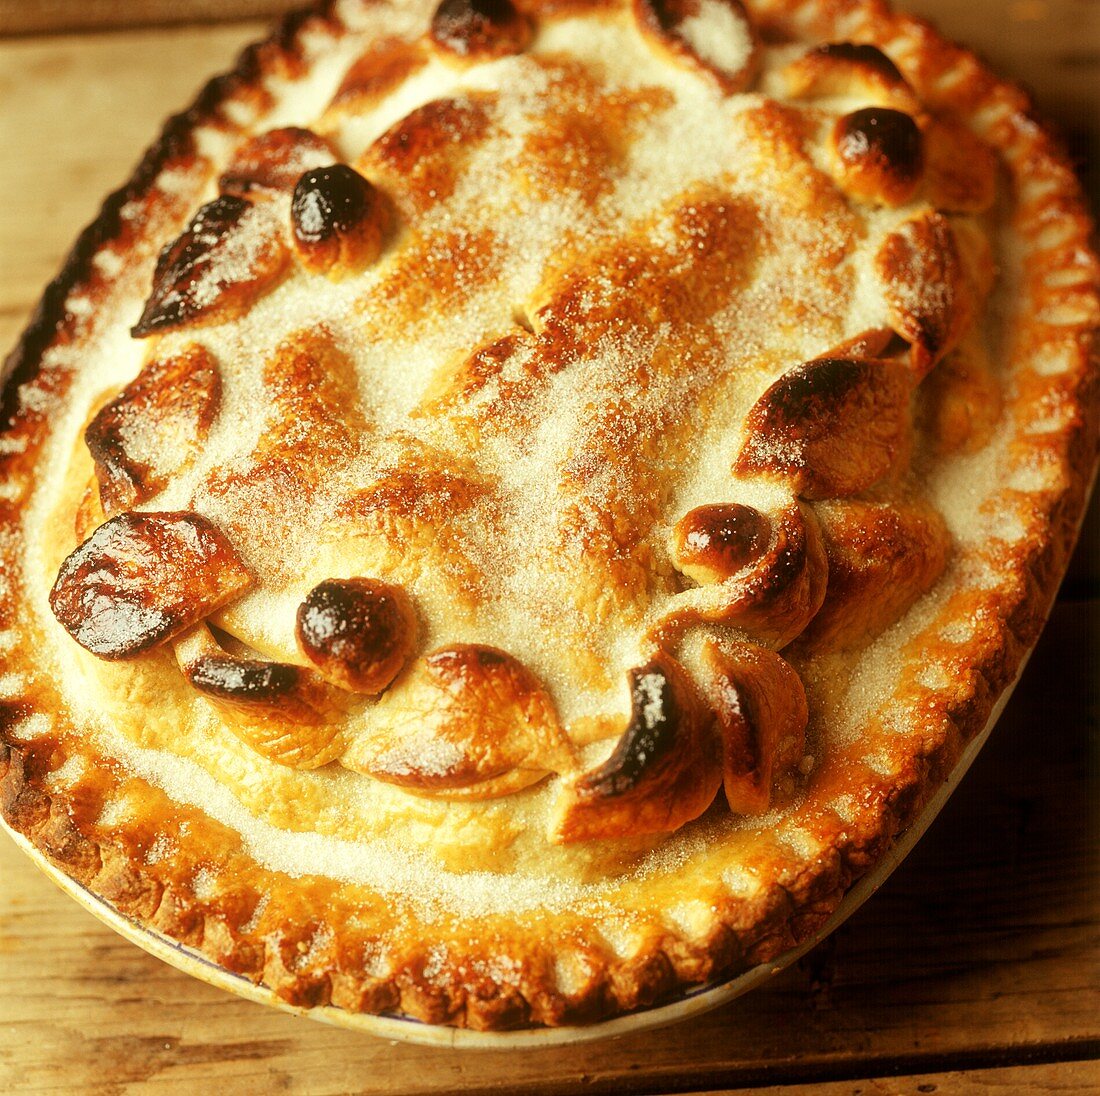 Shortcrust pastry pie with sugar